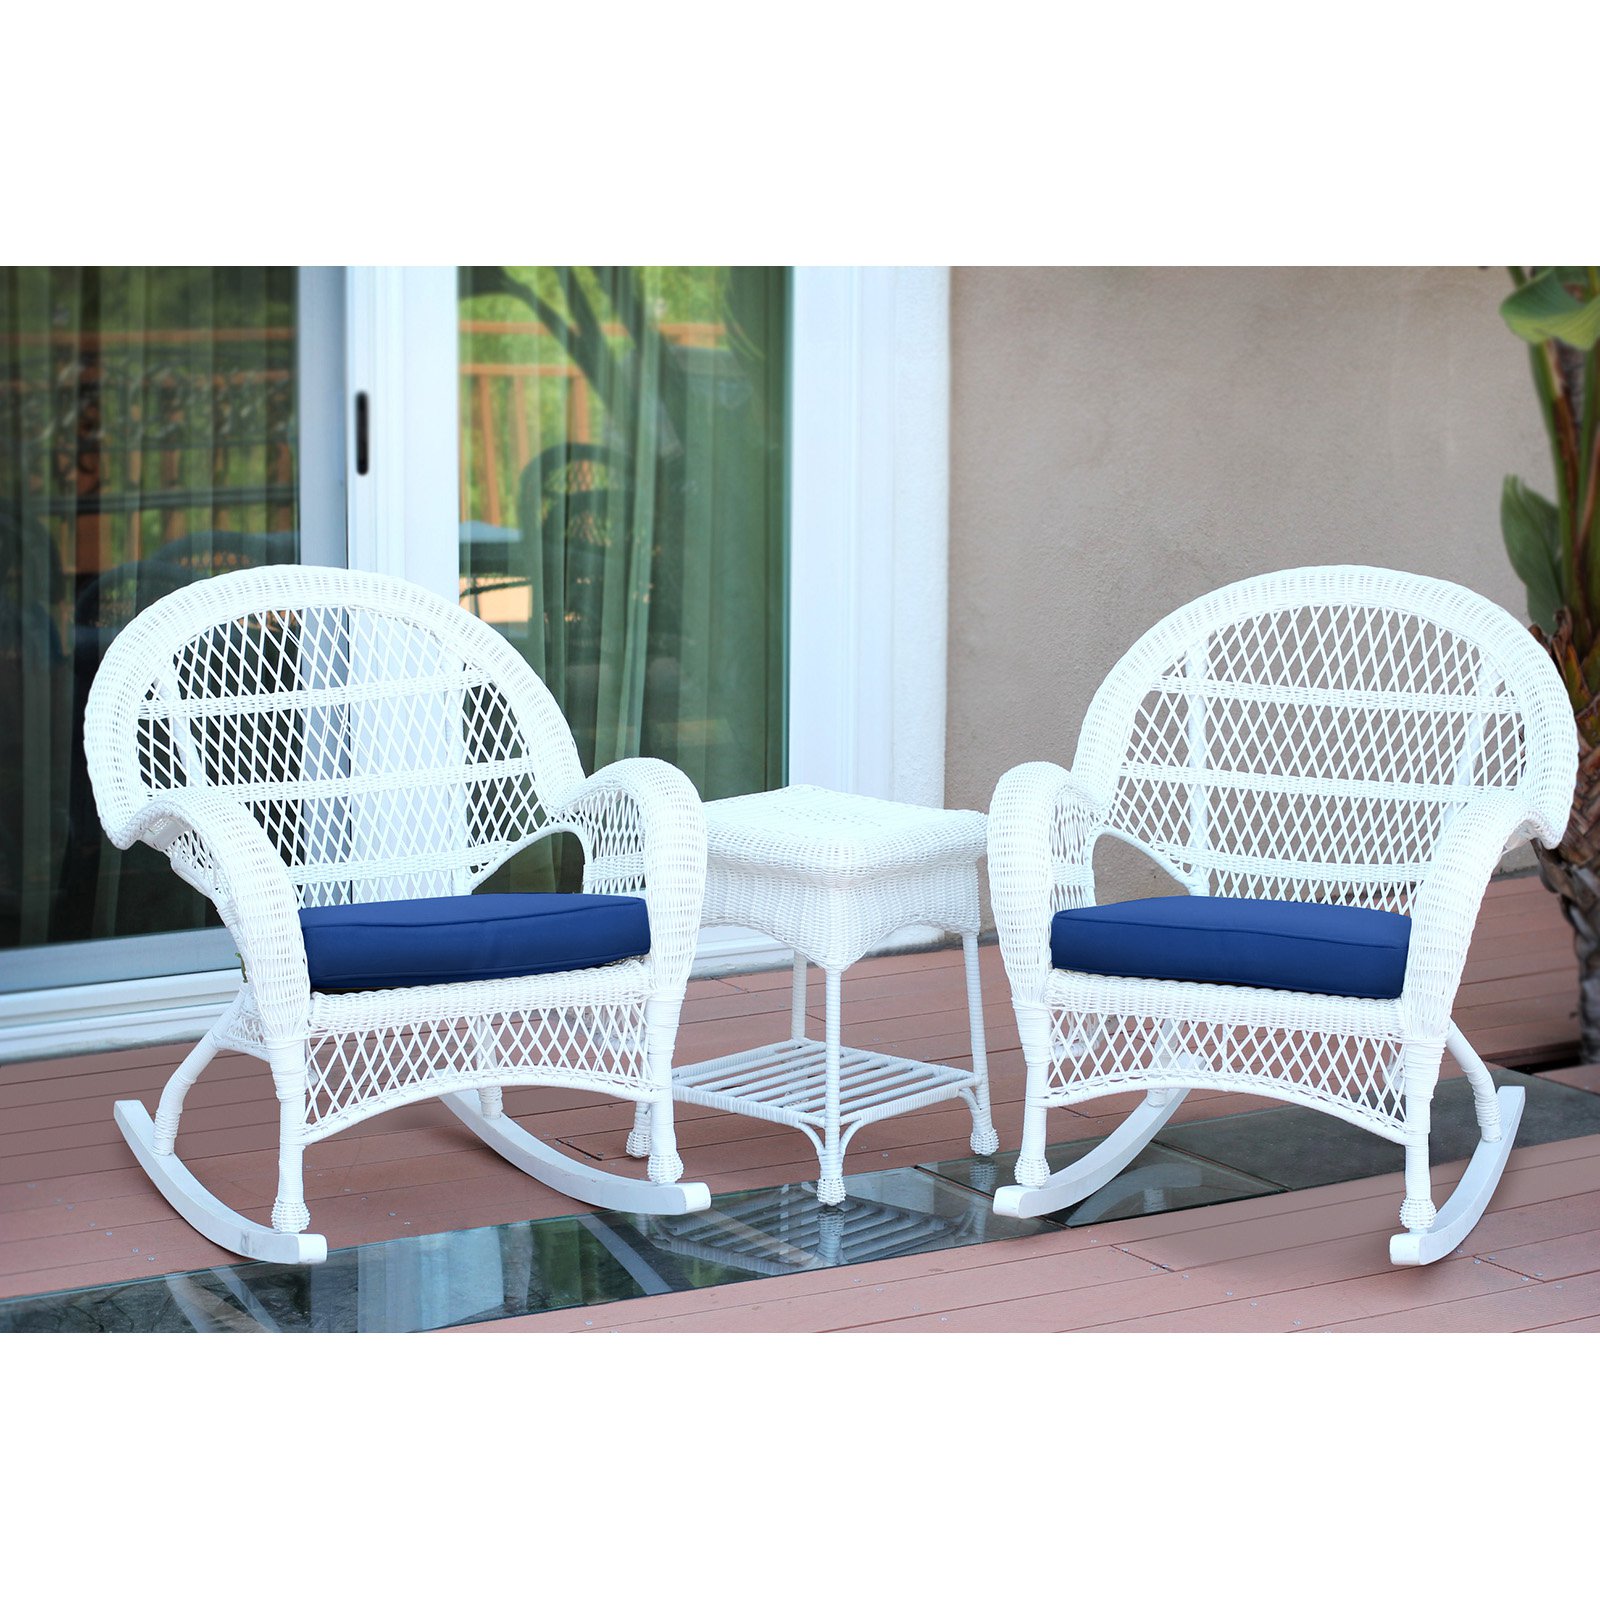 Jeco Santa Maria 3 Piece Wicker Rocker Chat Set with Optional Cushion - image 5 of 11